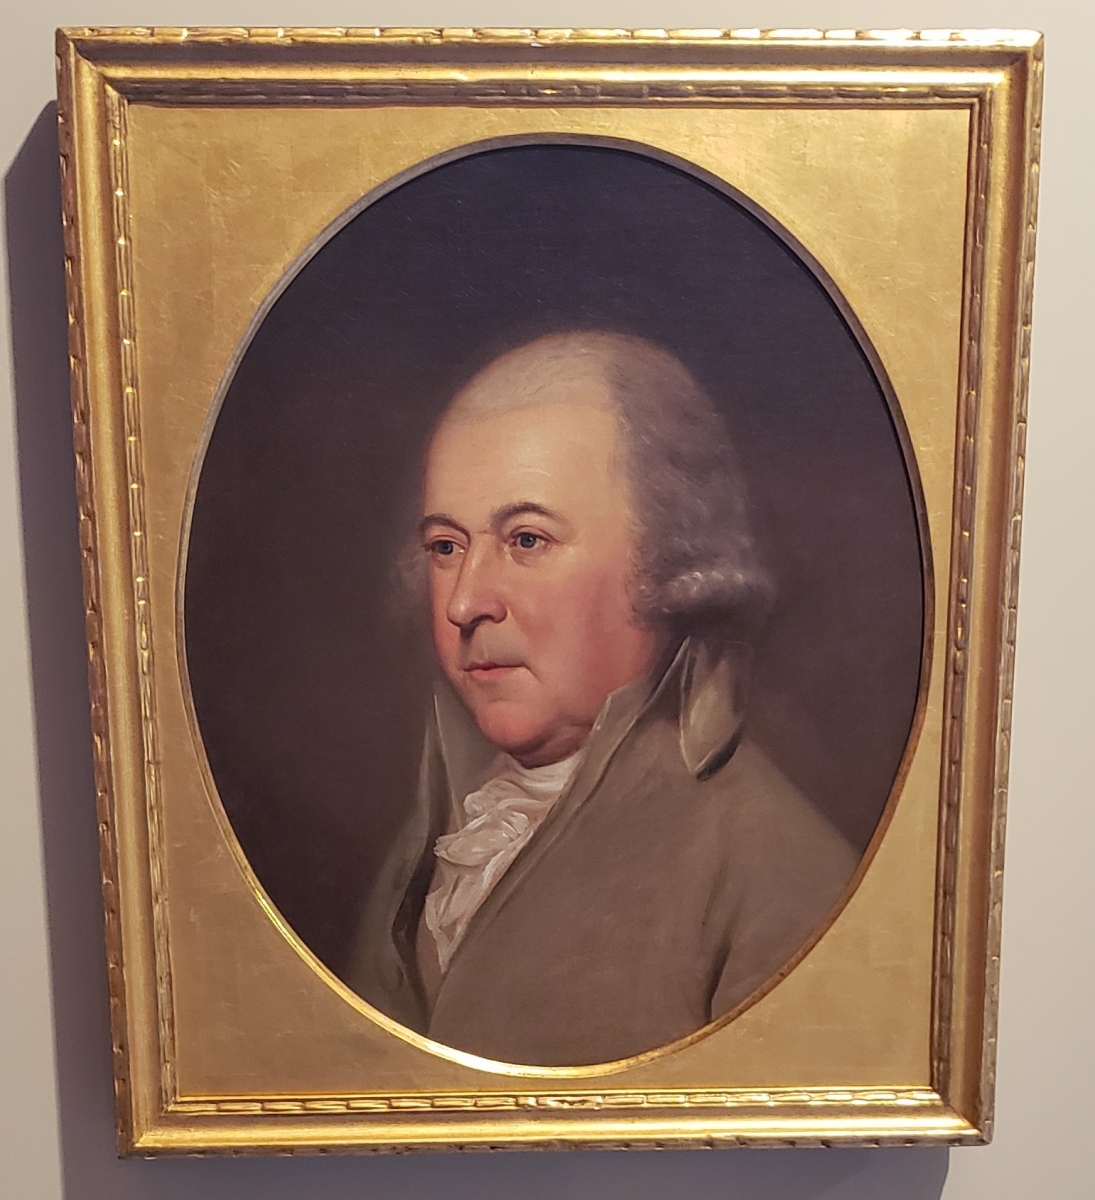 Portrait of John Adams hanging in the Second Bank of the United States Portrait Gallery